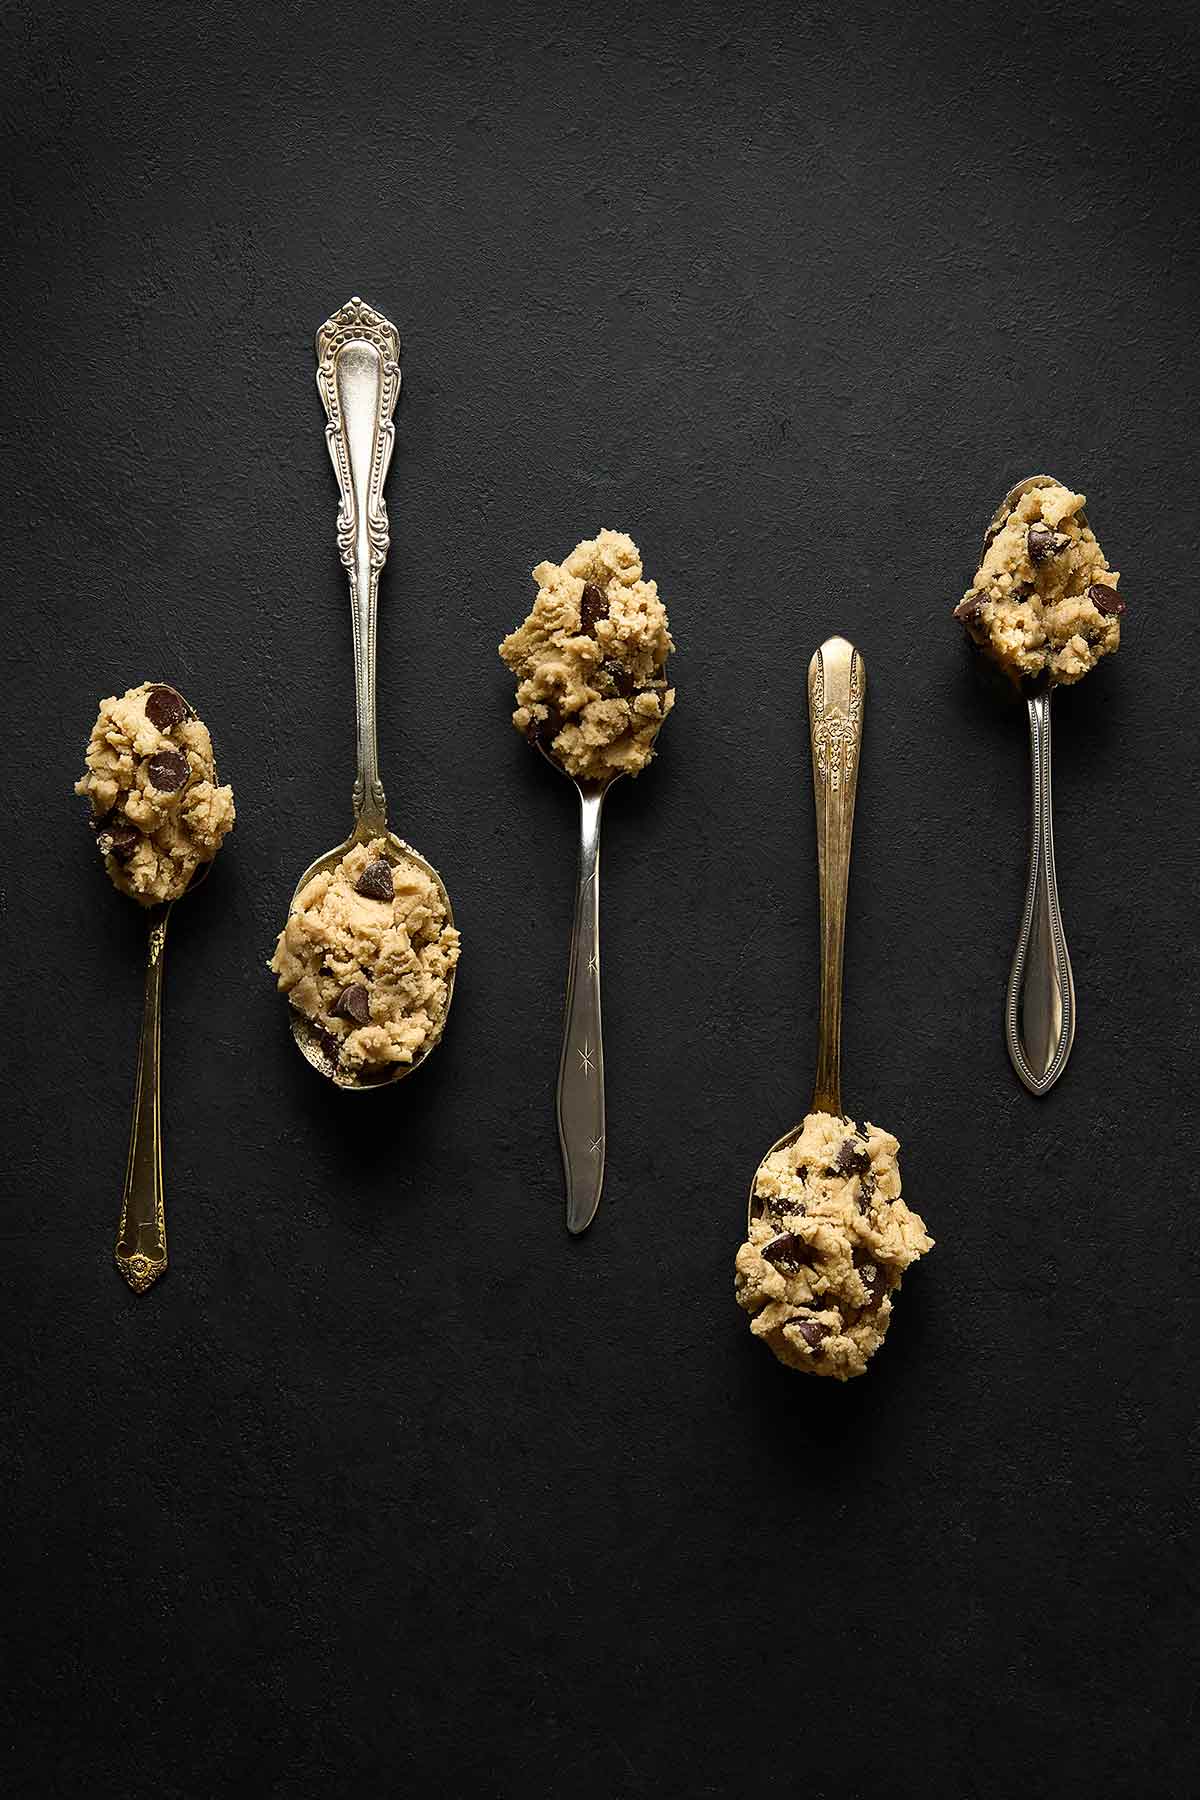 Five silver spoons, each with a scoop of eggless chocolate chip cookie dough.